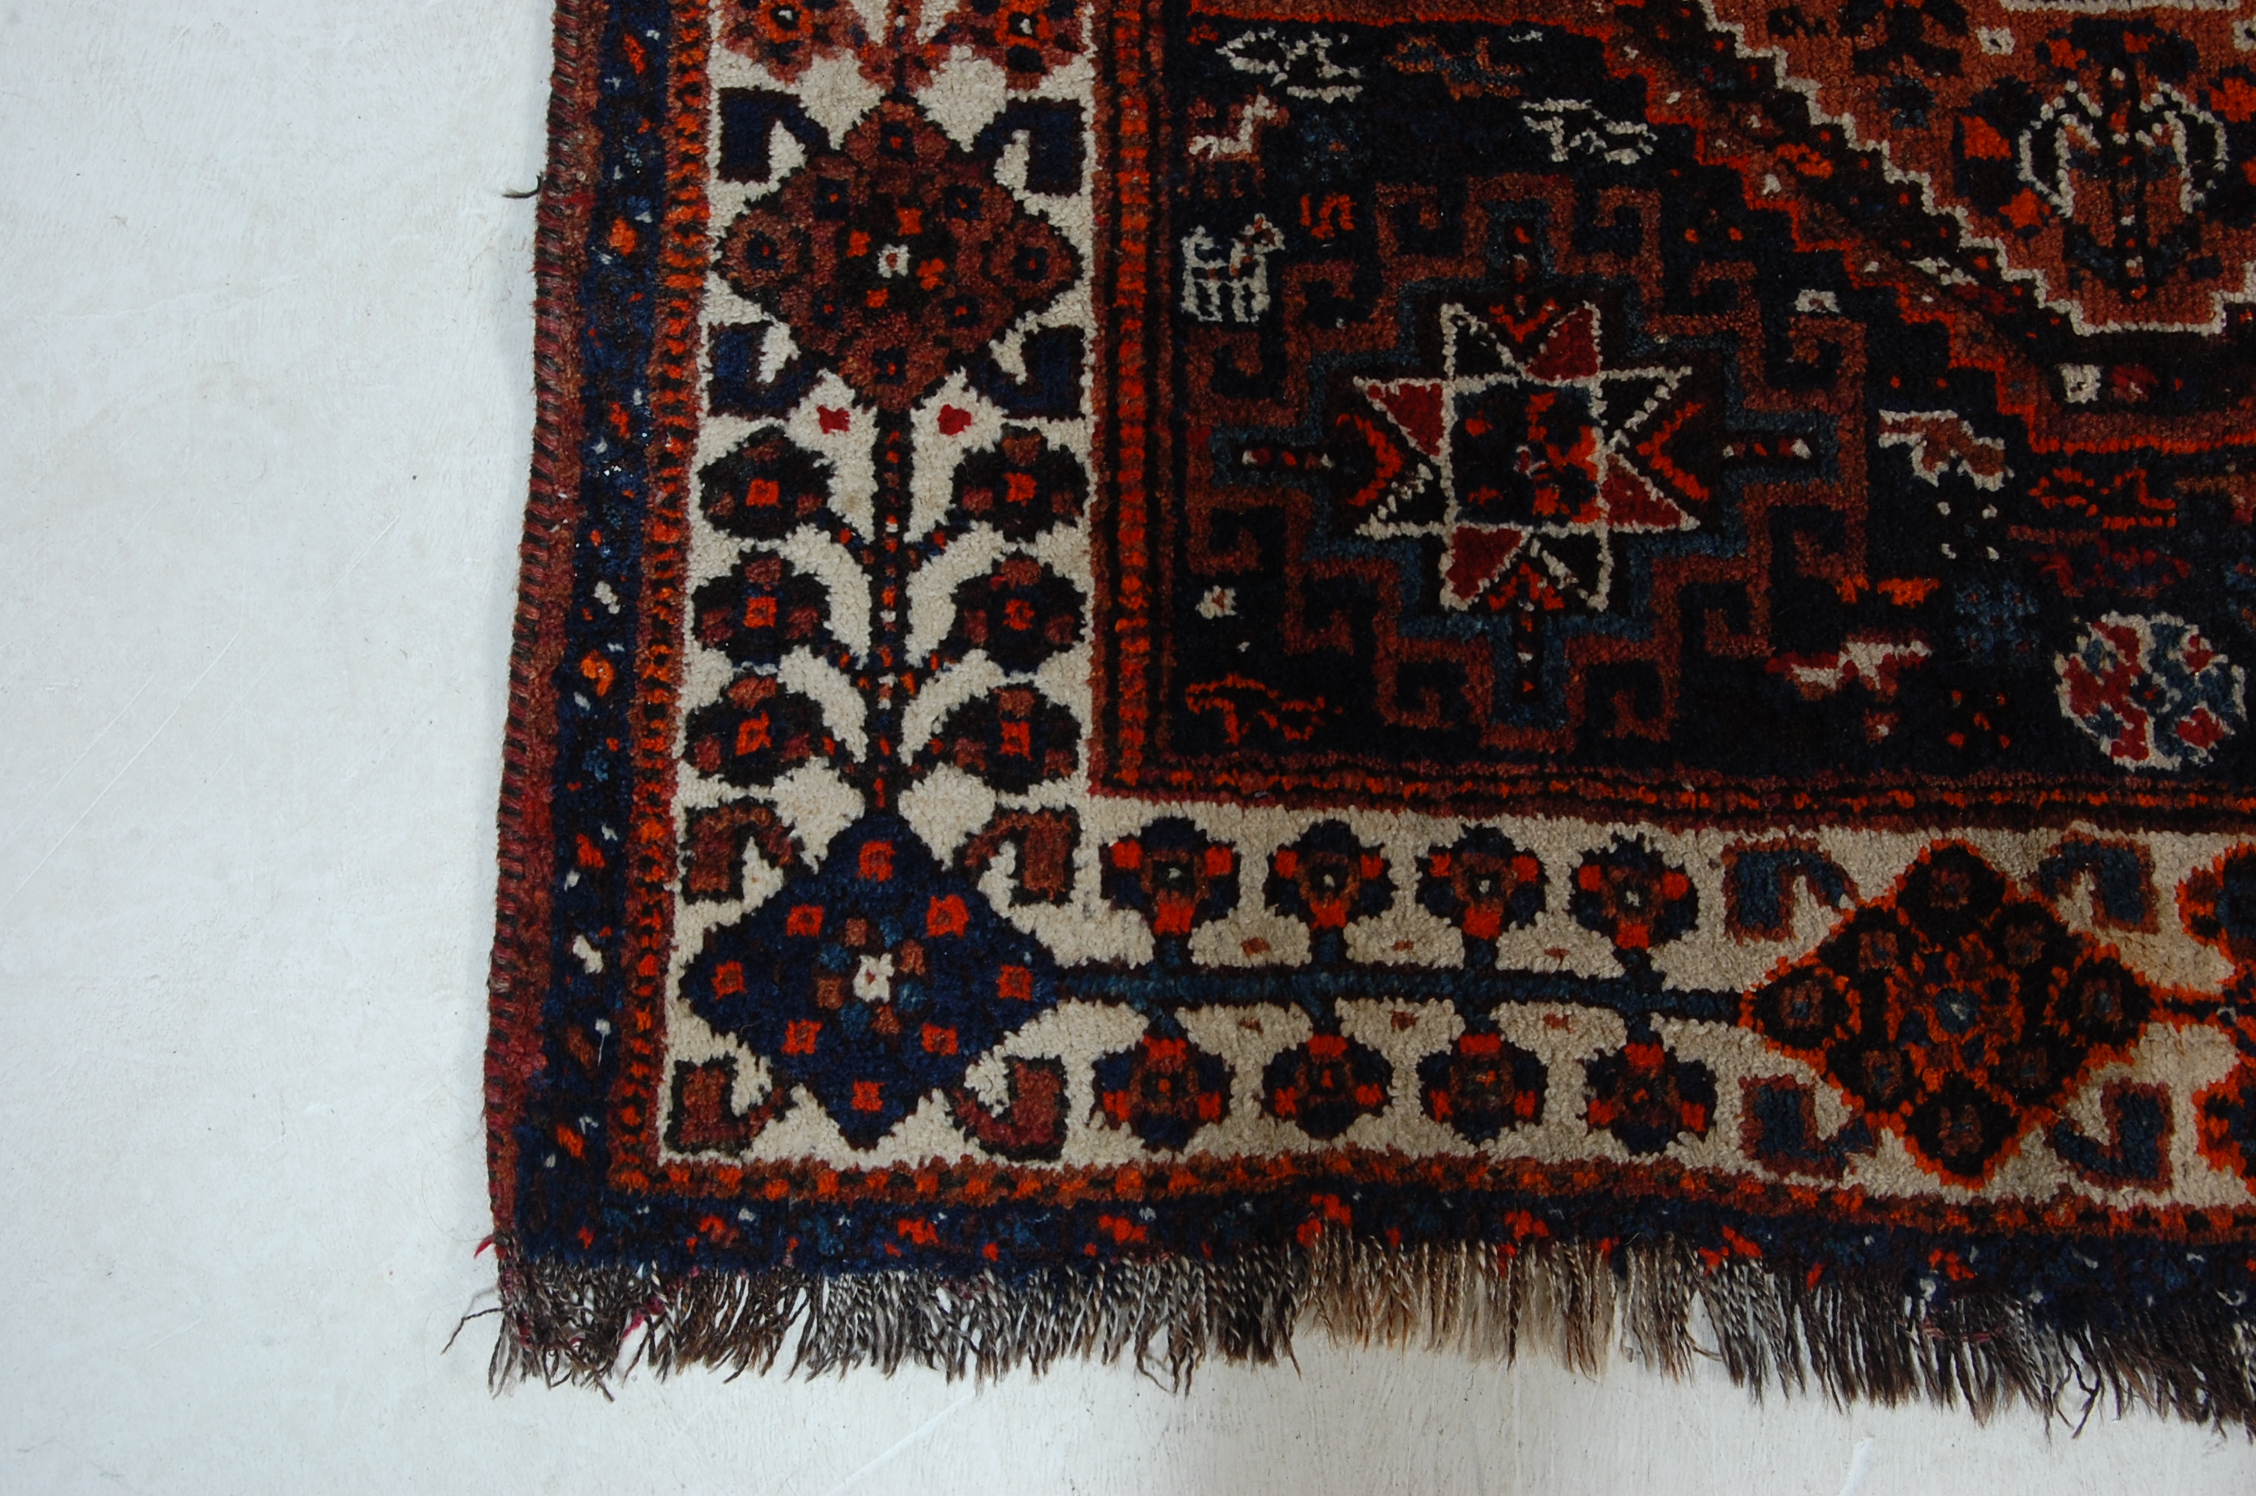 EARLY 20TH CENTURY NATURAL DYED AND HAND-WOVEN WOOL AFGHAN RUG / CARPET - Image 3 of 6